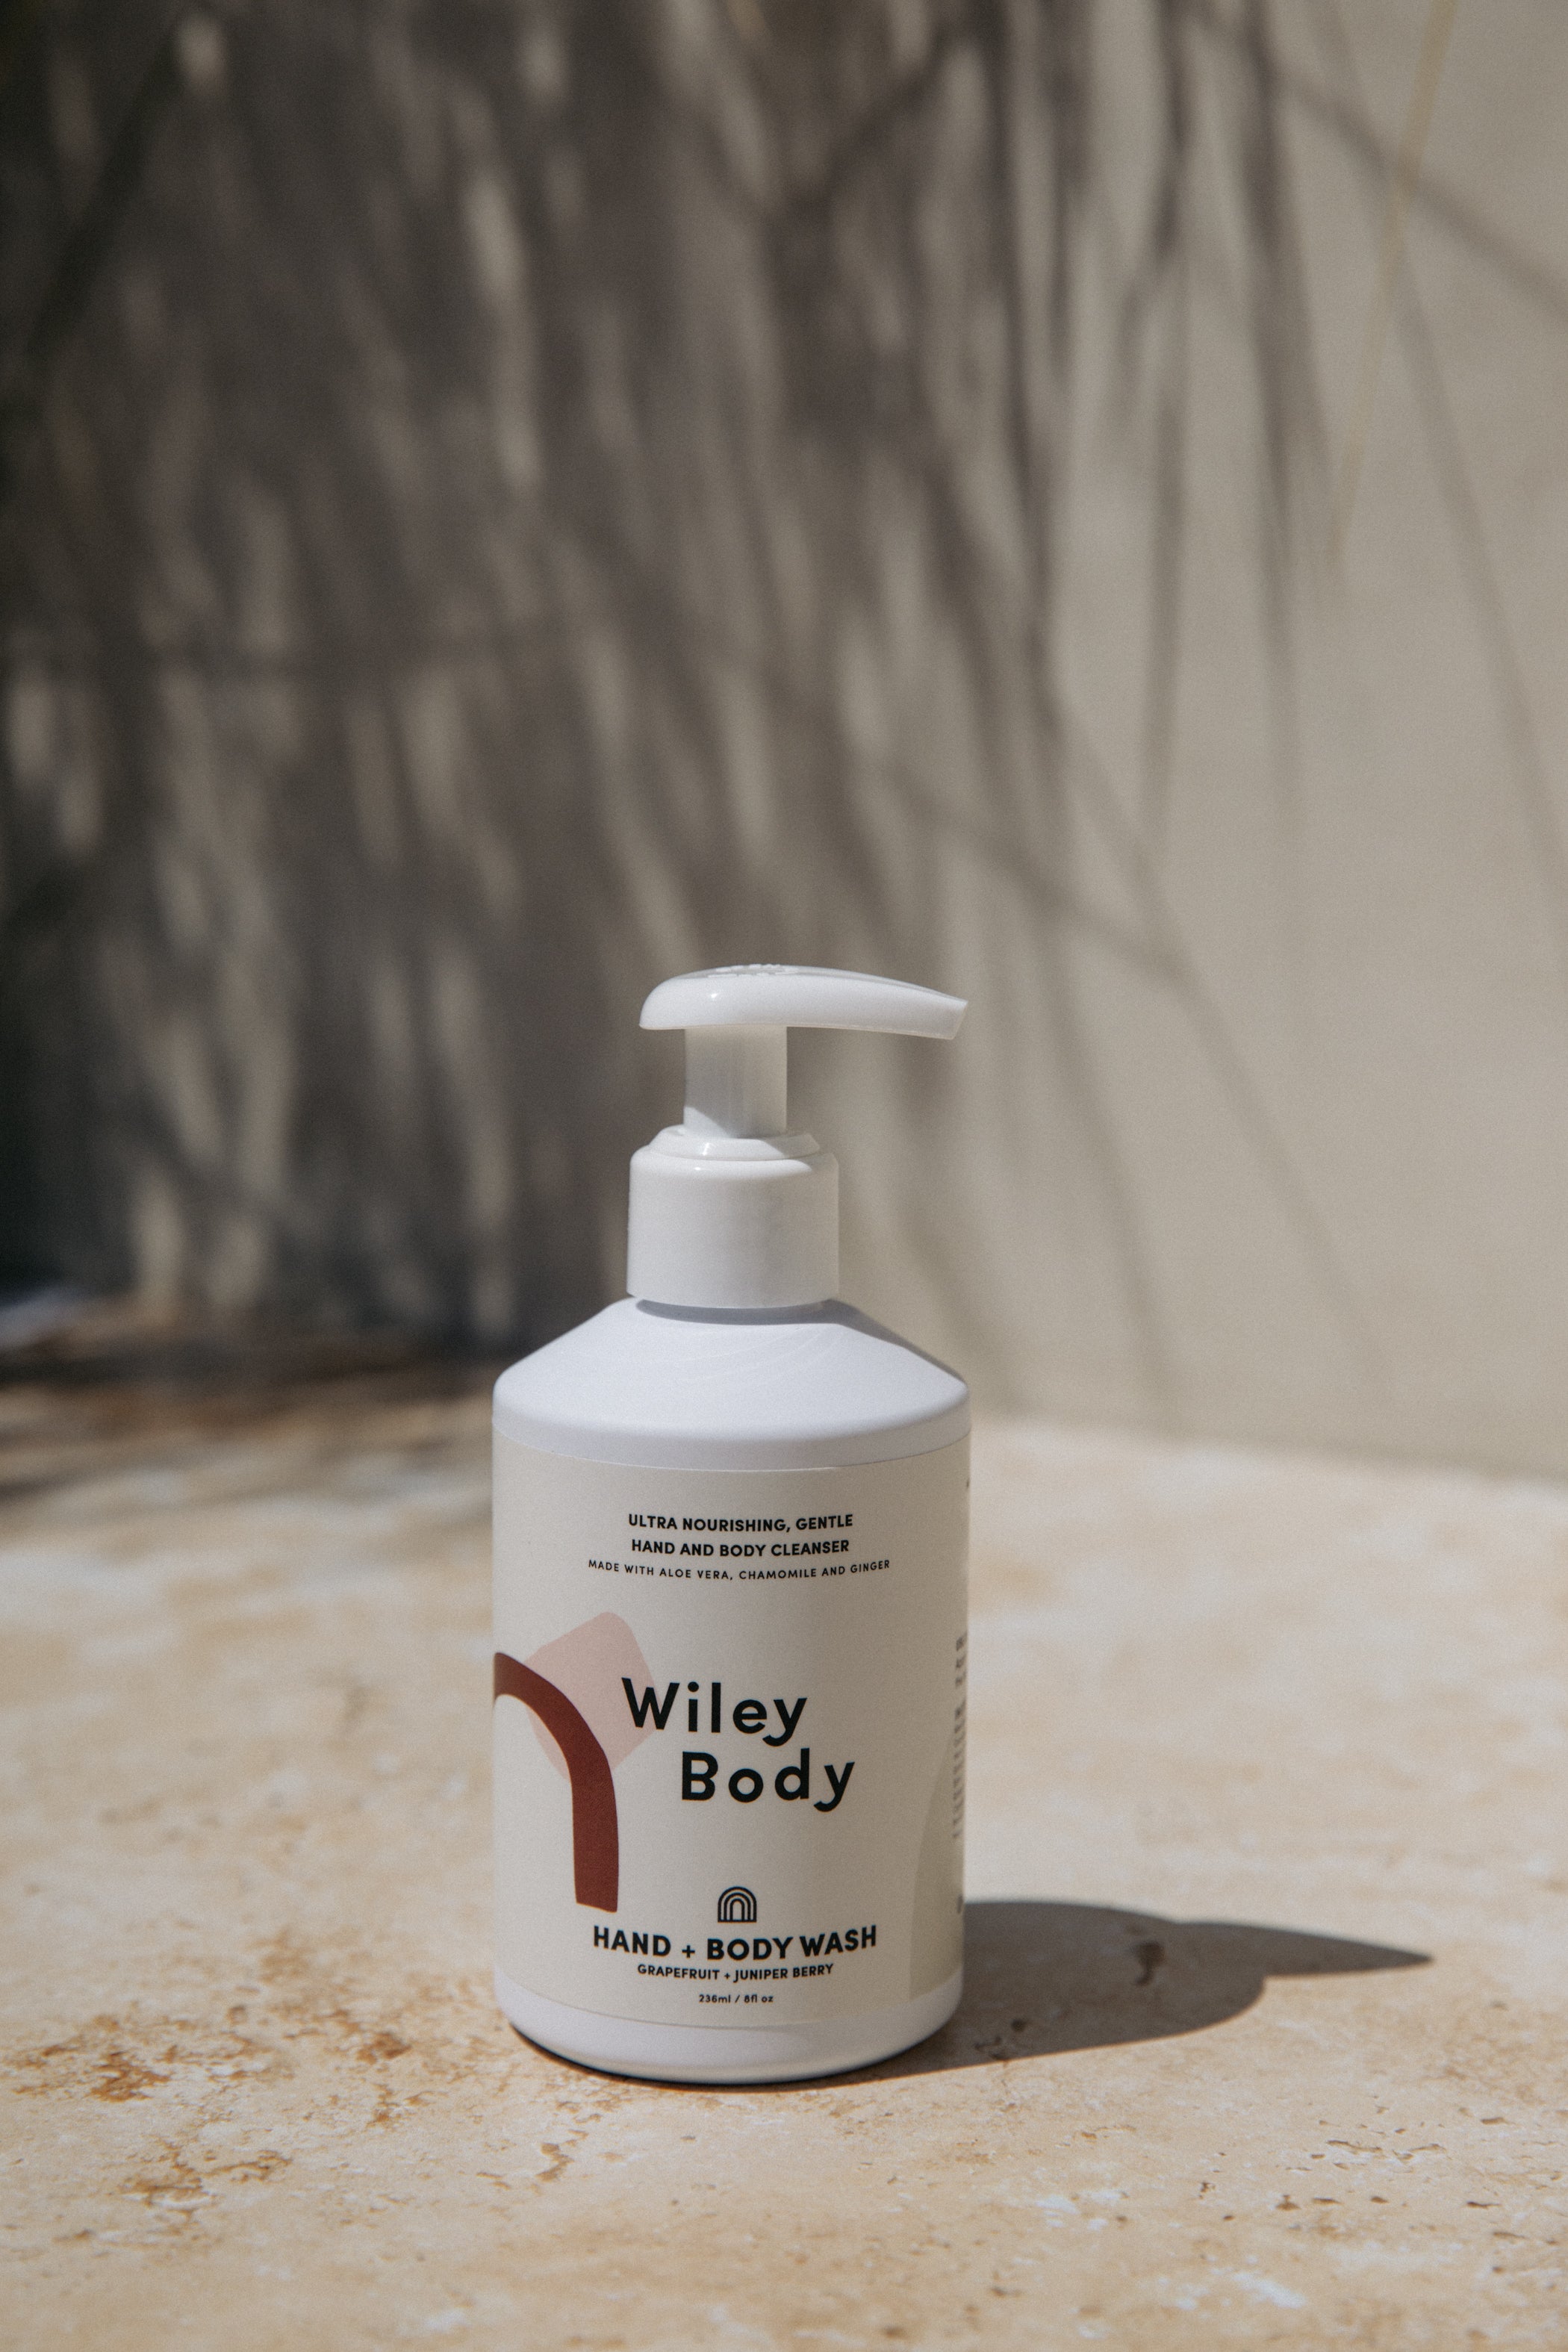 A white bottle with a label that reads Hand & Body Wash, ultra nourishing, gentle hand & body cleanser